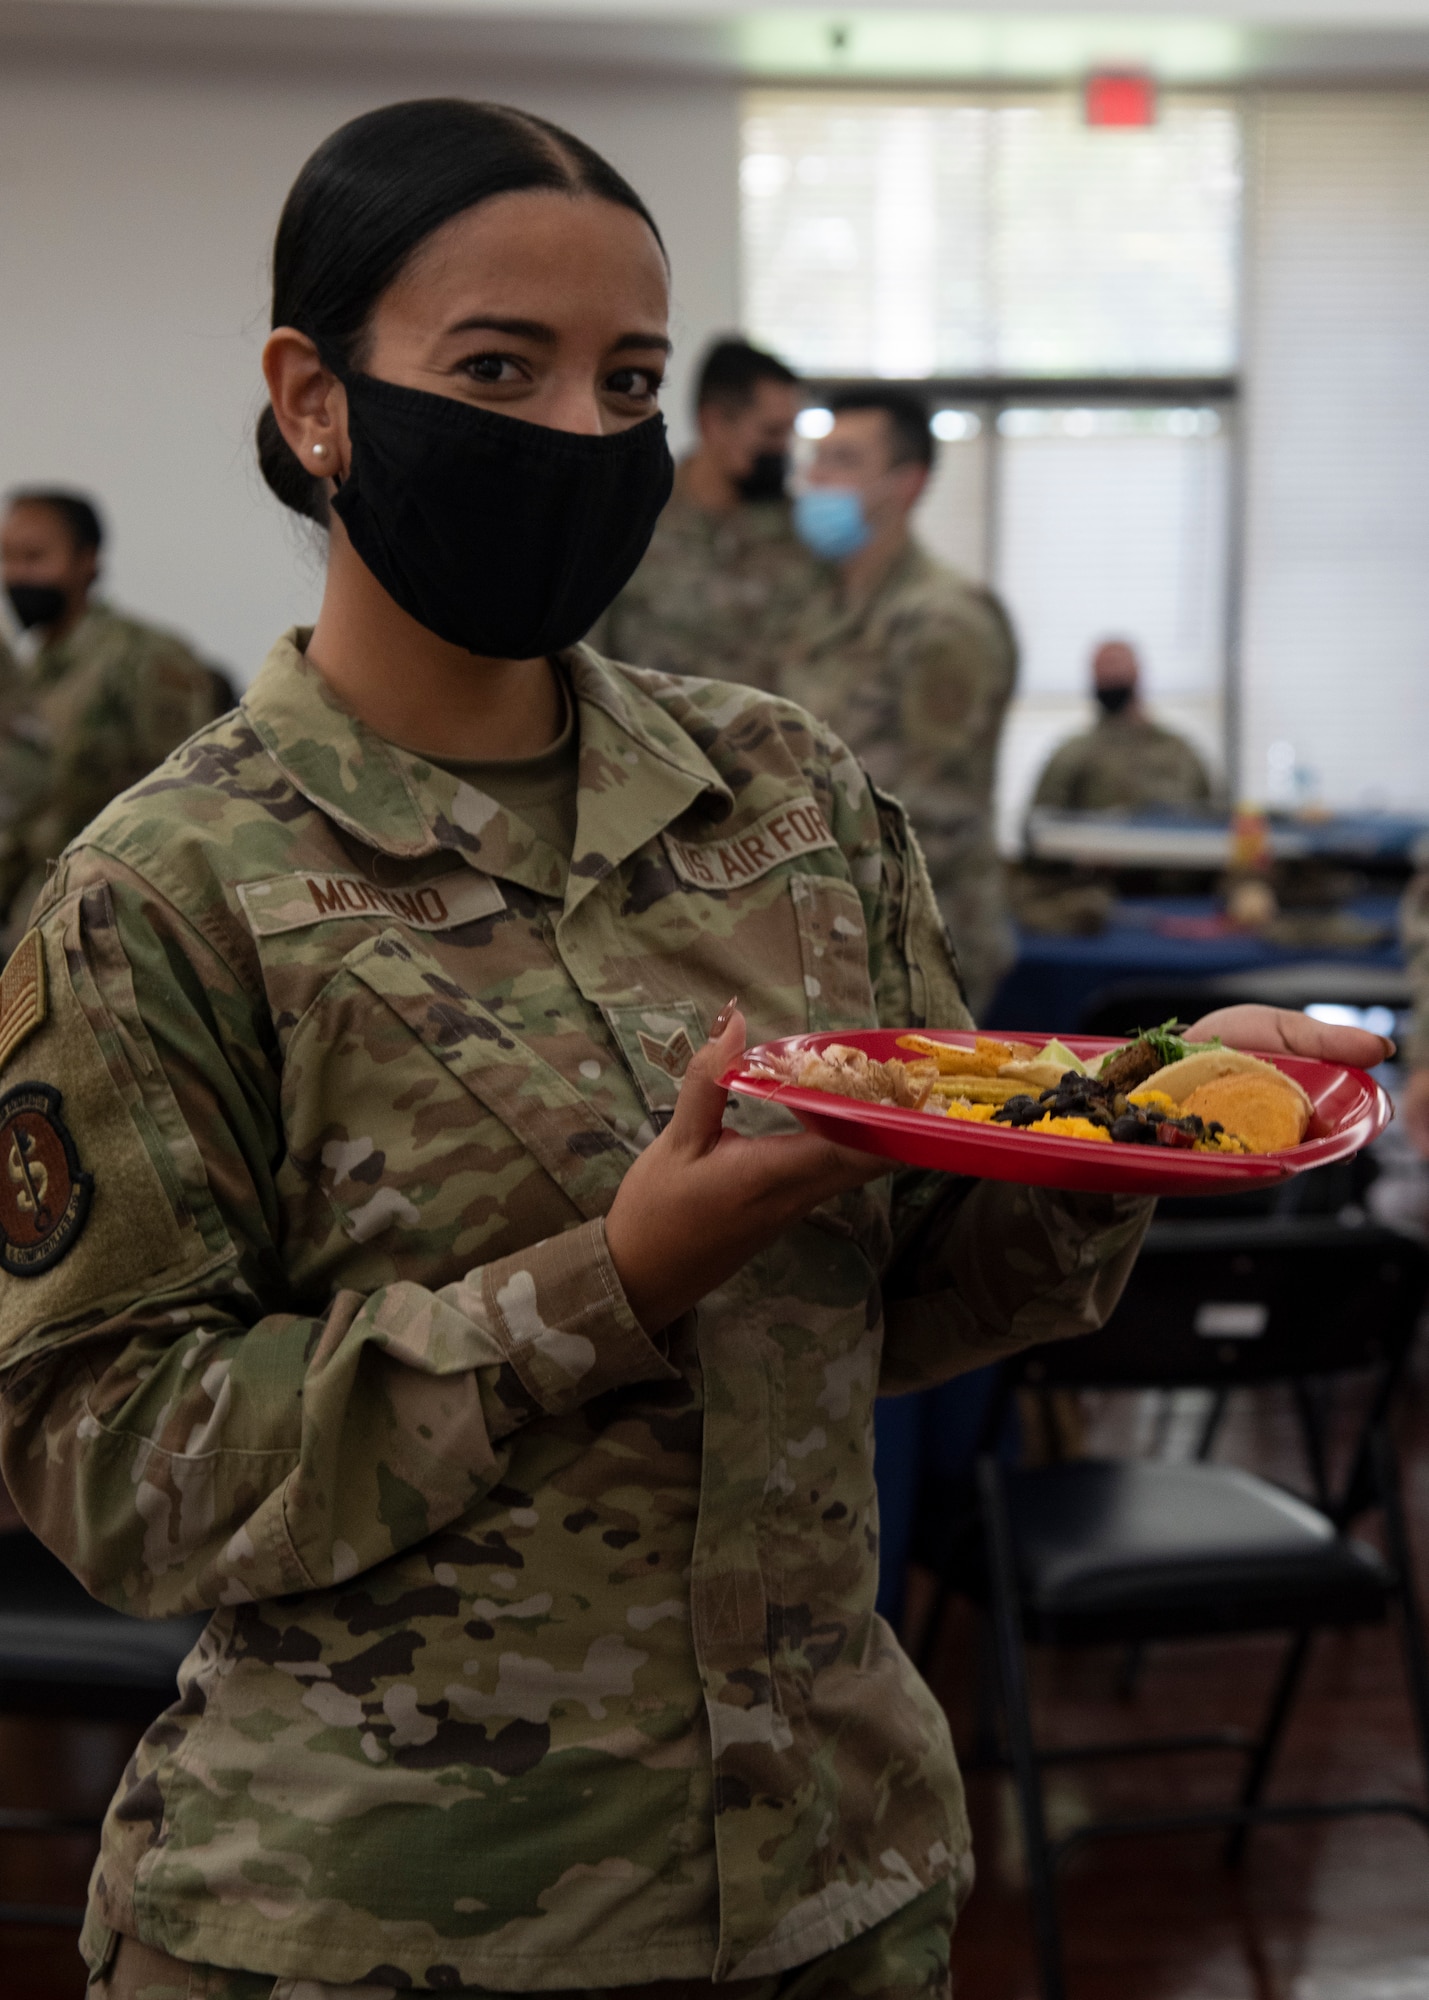 U.S. Air Force Staff Sgt. Christina Moreno, 6th Force Support Squadron First Term Airman Course noncommissioned officer in charge, poses for a photo during a Hispanic Heritage Month celebration at MacDill Air Force Base, Florida, Oct. 14, 2021.